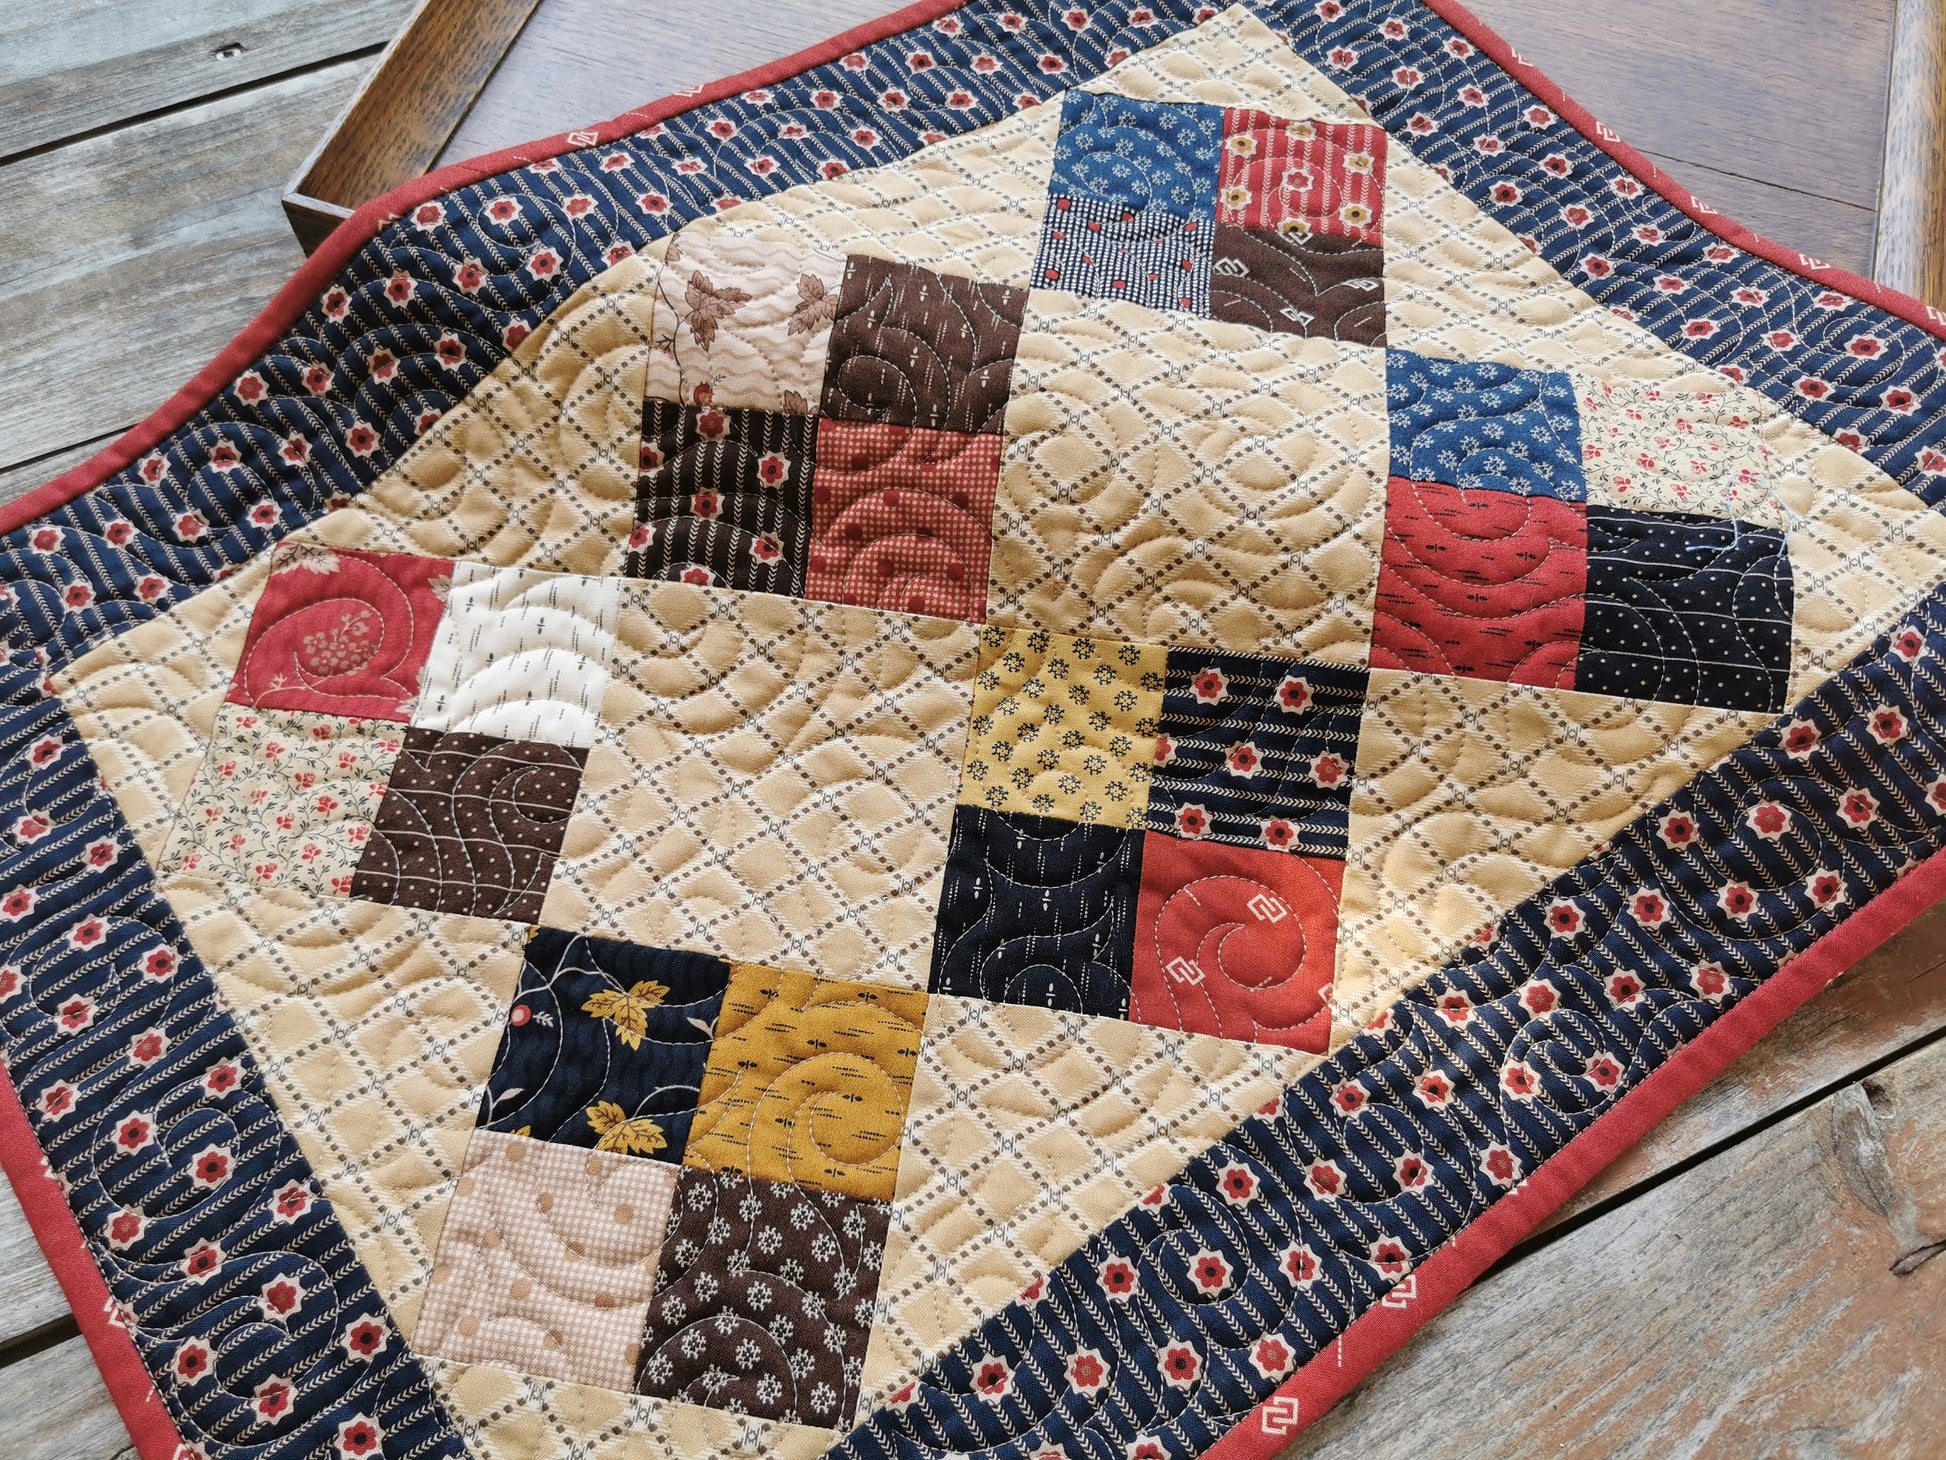 The quilted table runner is pictured on a slight angle to showcase the swirl quilting , which adds nice texture. Scrappy fabrics are civil war reproduction prints.